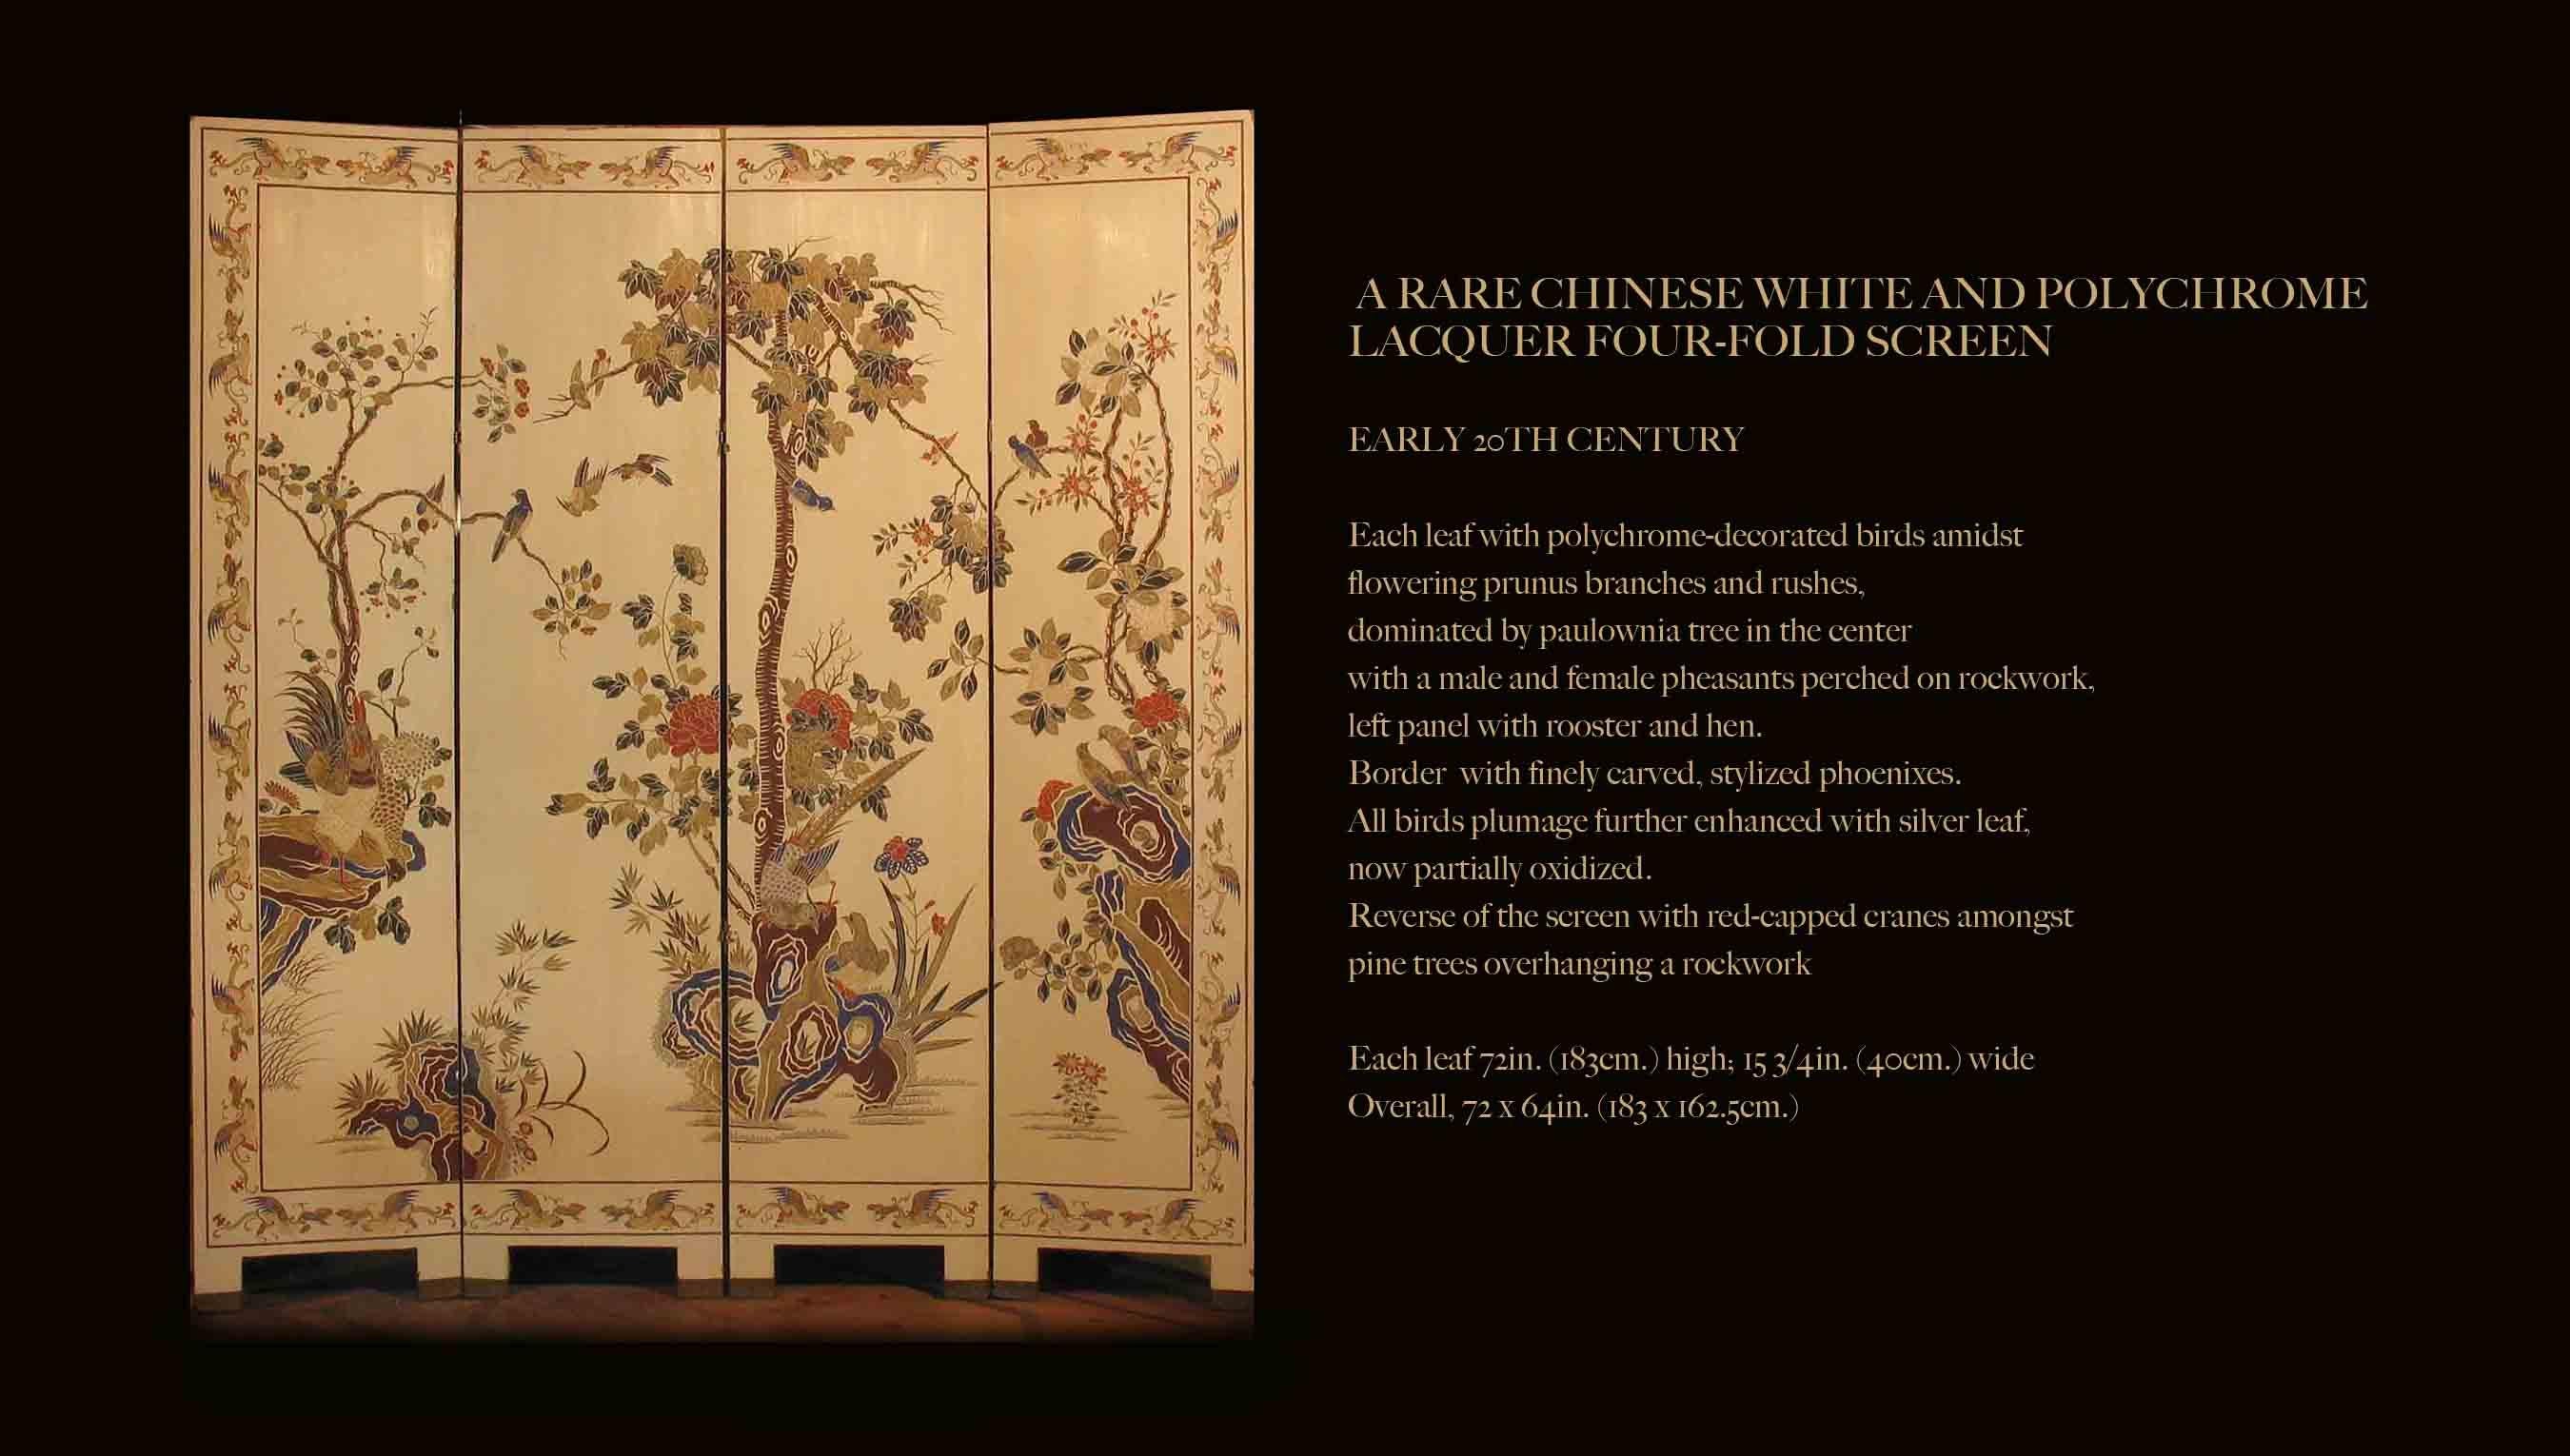 A rare Chinese white and polychromed lacquer four-fold screen, early 20th century, each leaf with polychrome decorated birds amidst flowering prunus branches and rushes, dominated by paulowina tree in the centre with male and female pheasants